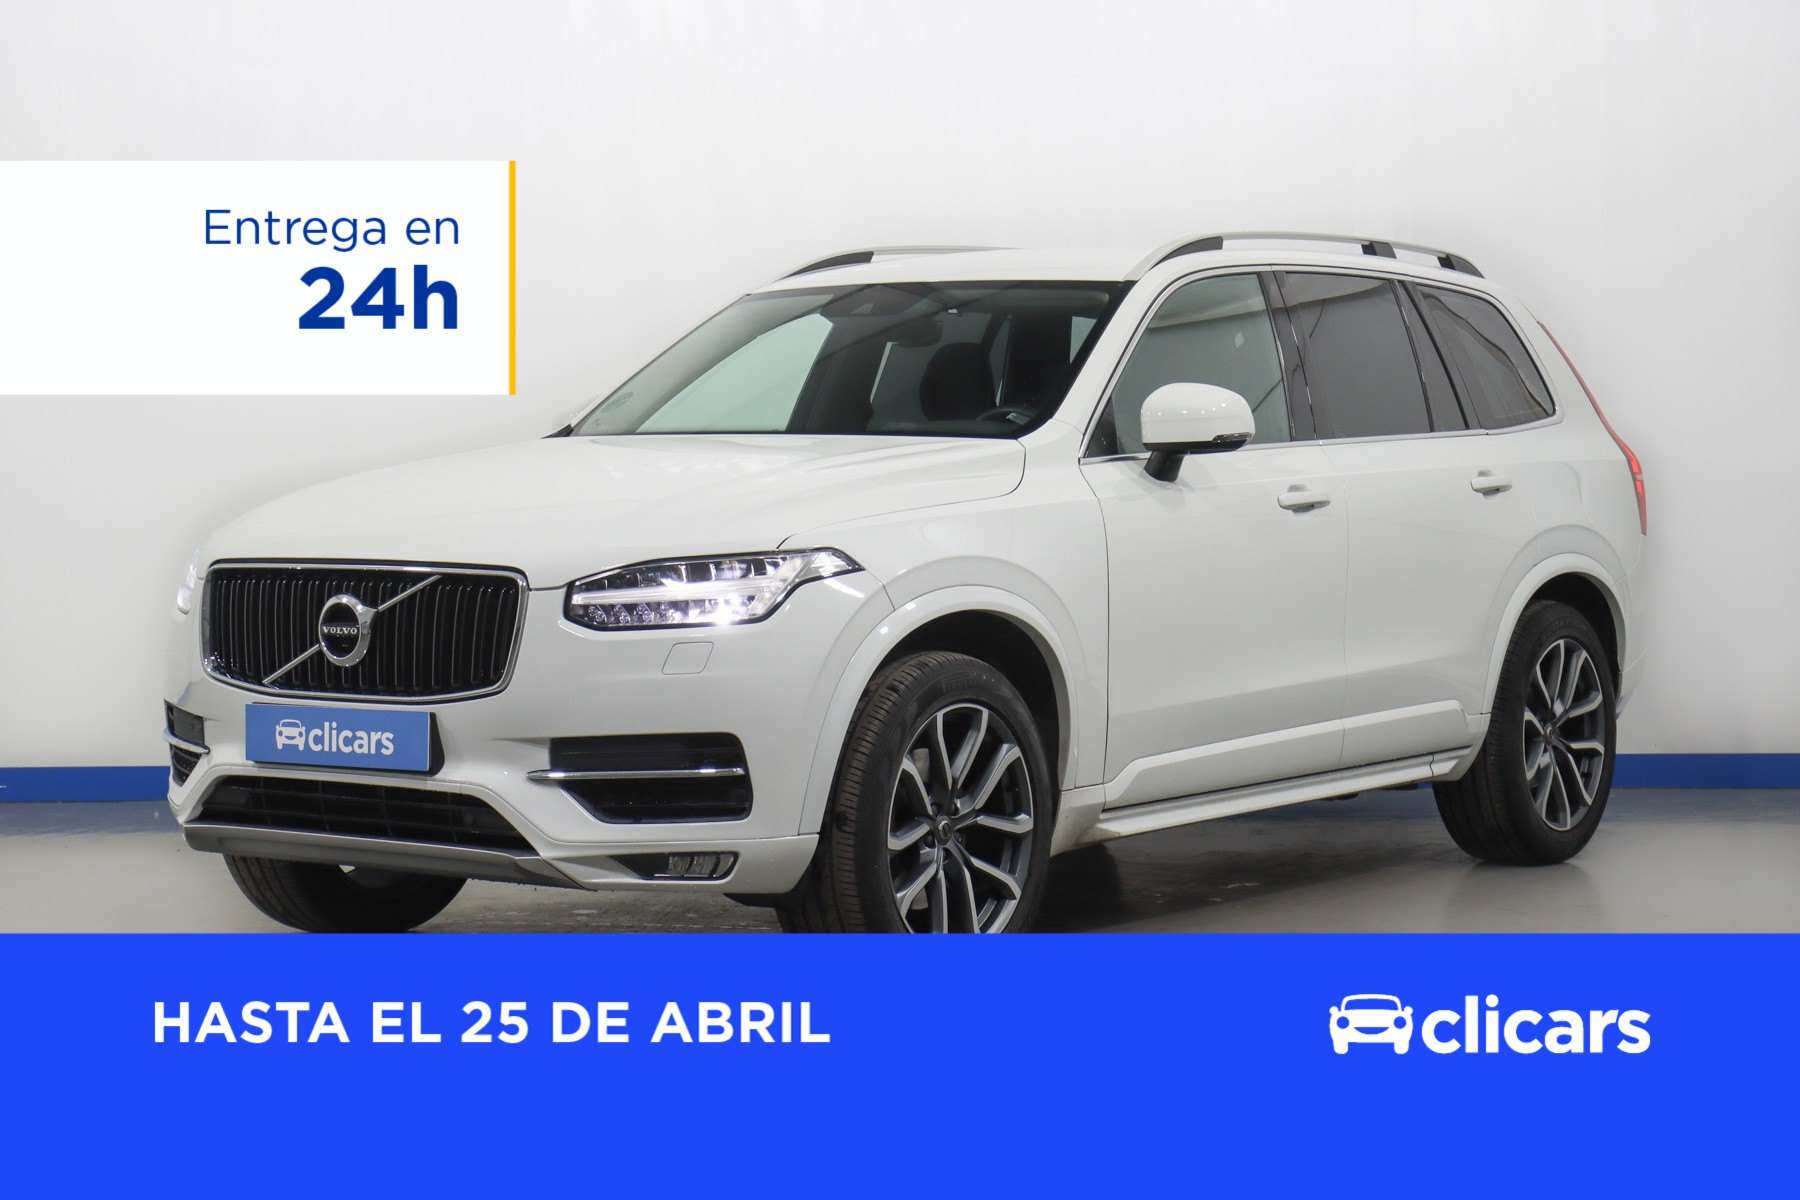 Volvo XC90 Off-Road/Pick-up in White used in MADRID for € 33,190.-